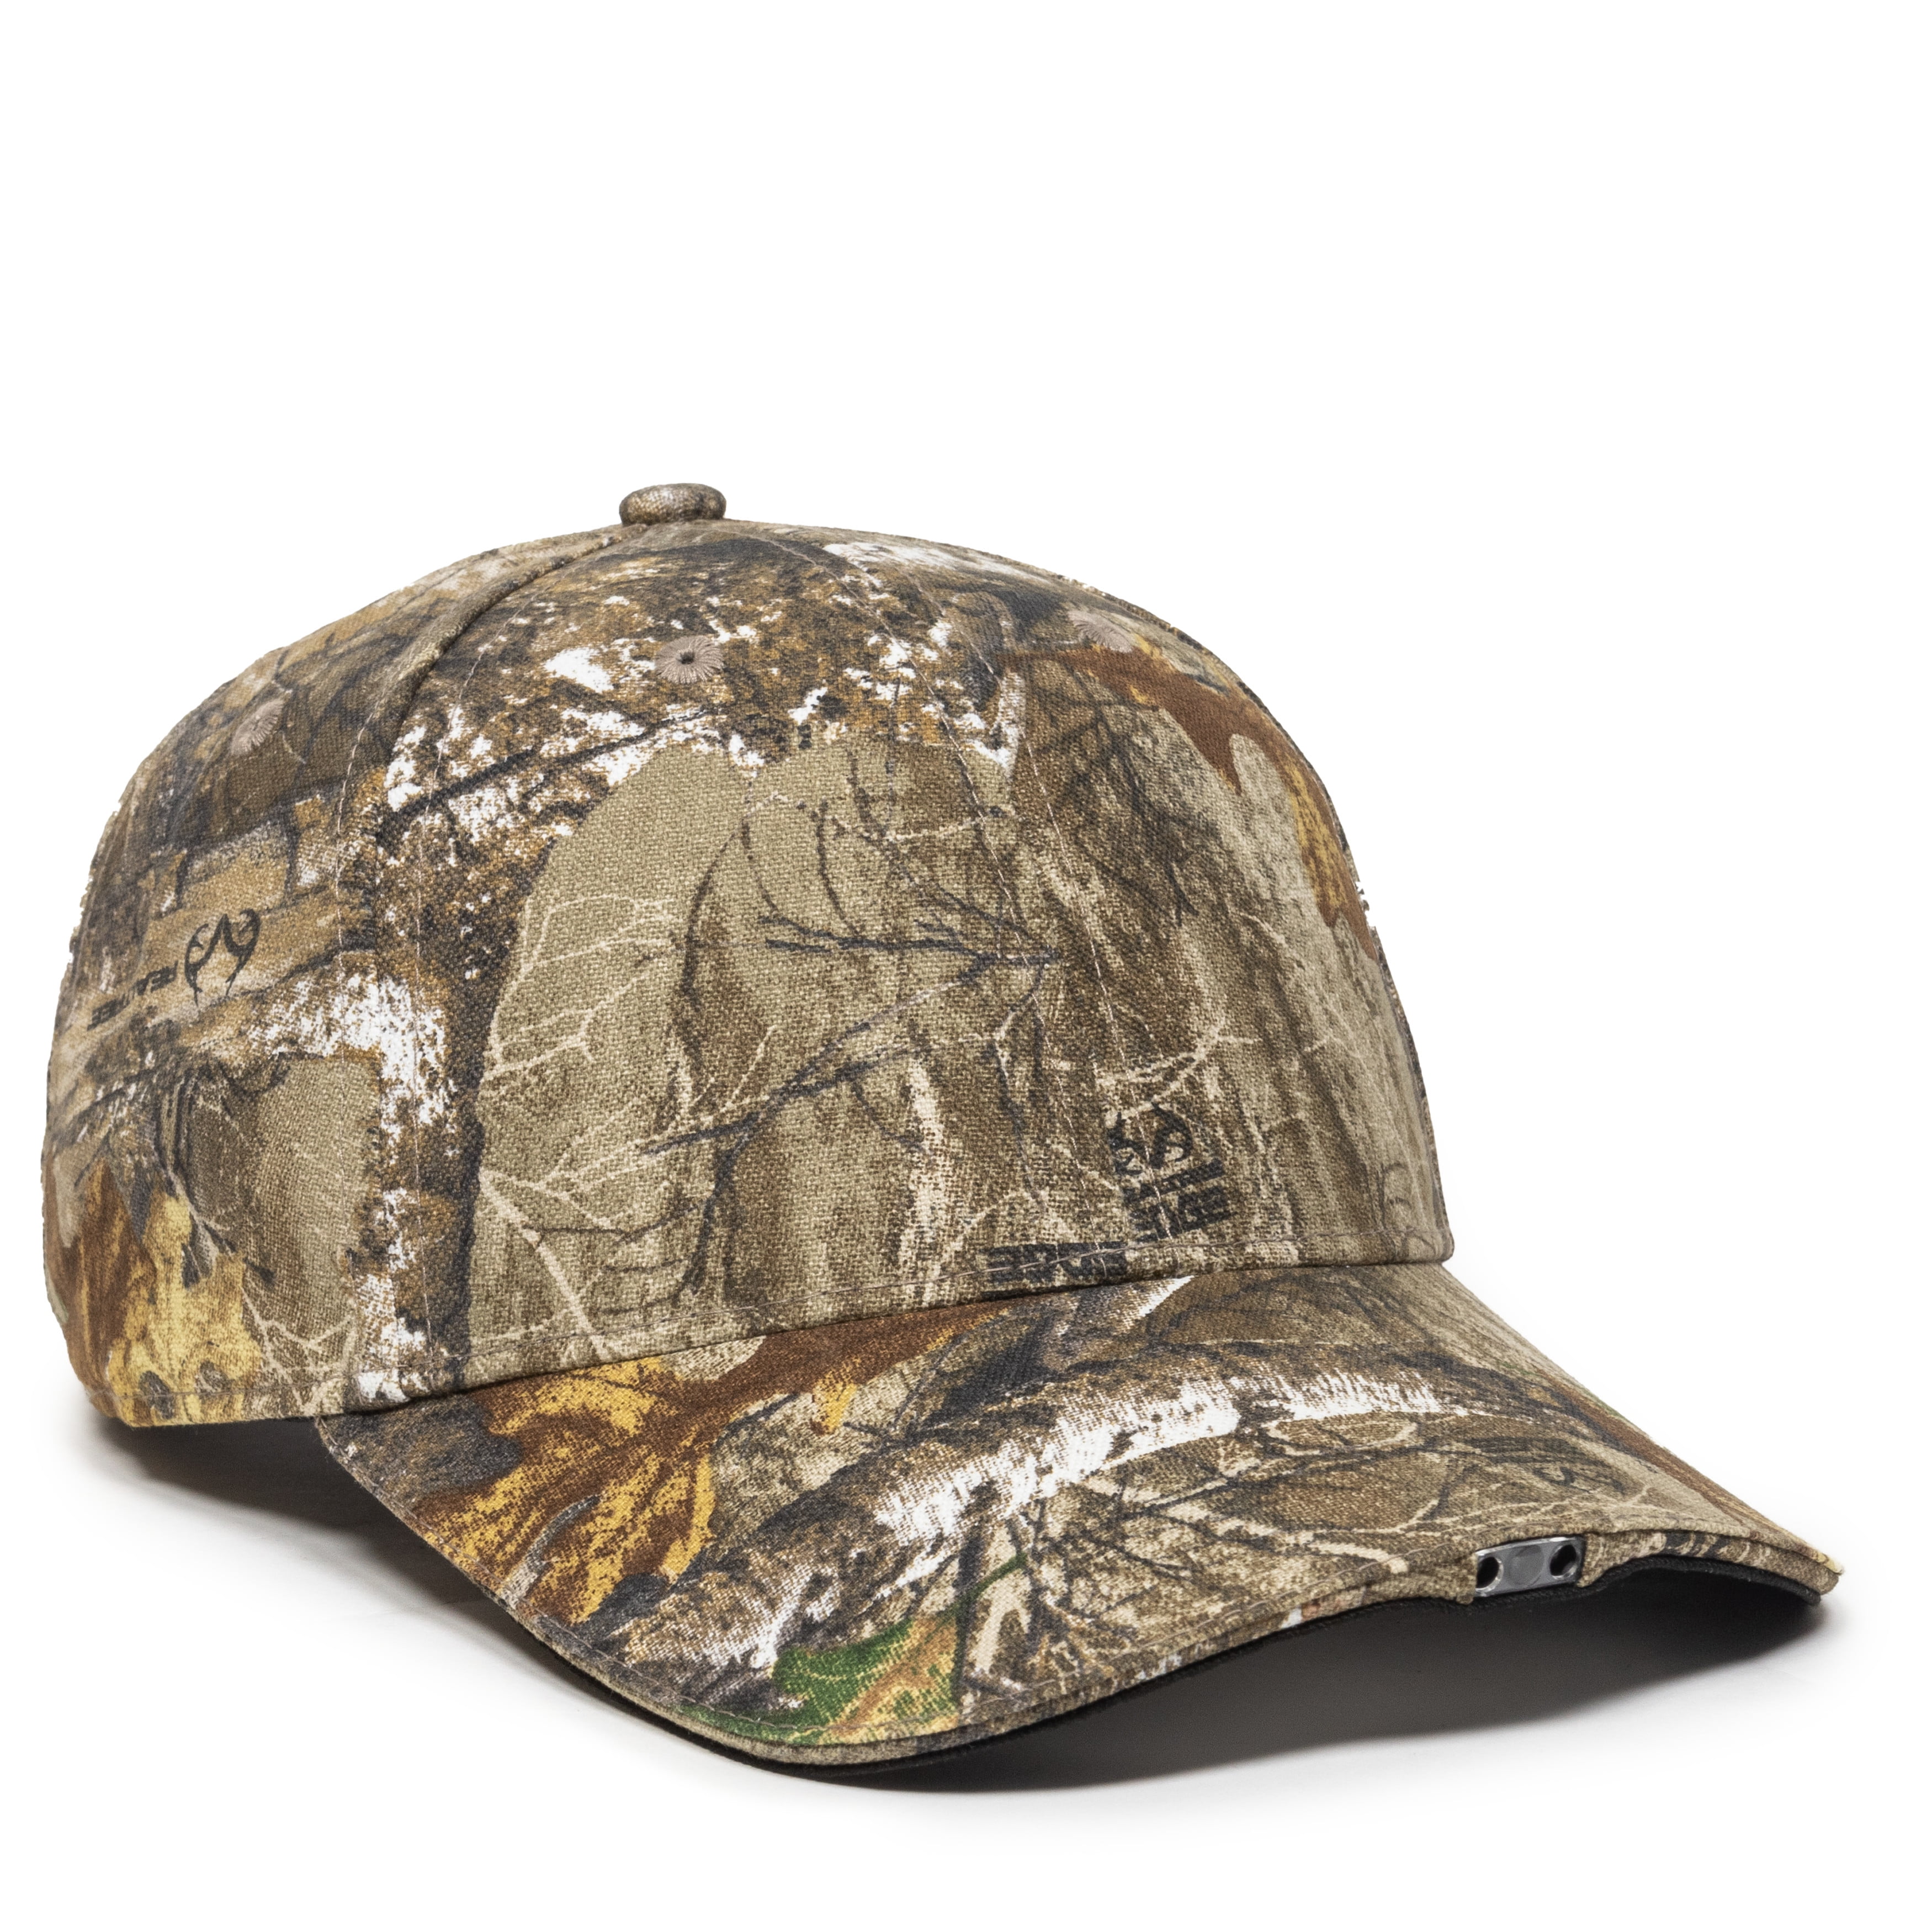 Realtree Lighted Hunting Structured Baseball Style Hat, Edge Camo